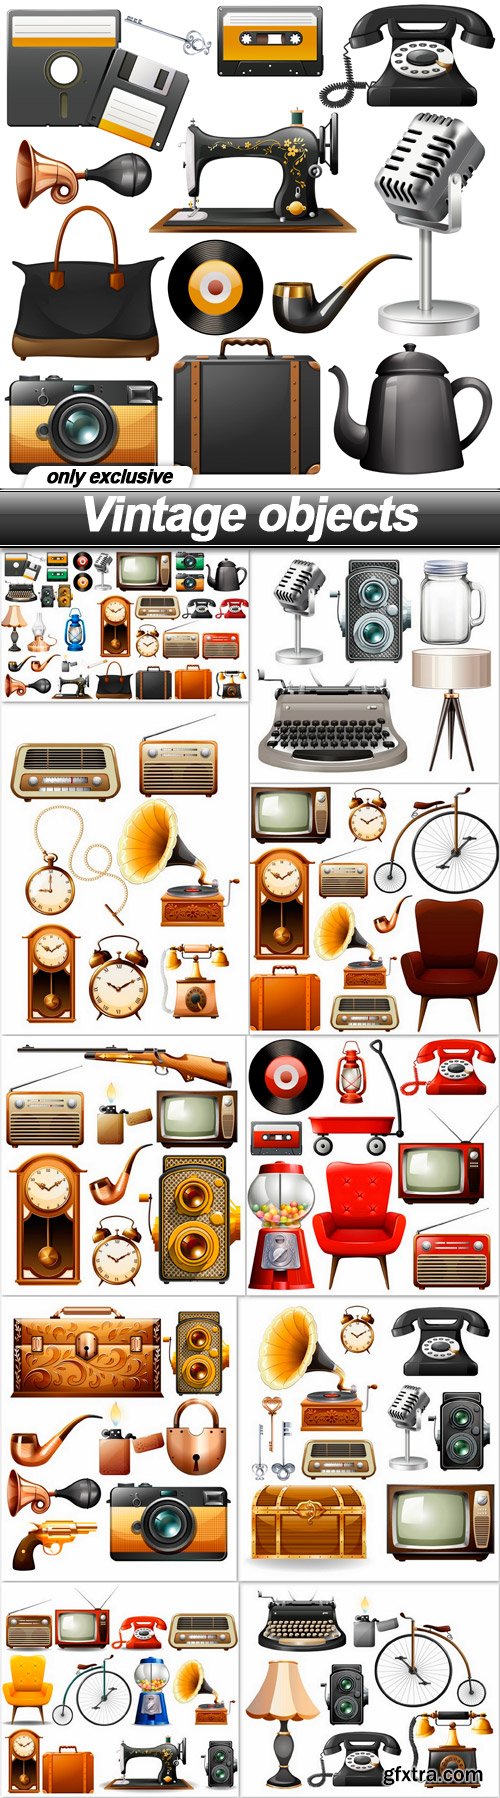 Vintage objects - 11 EPS